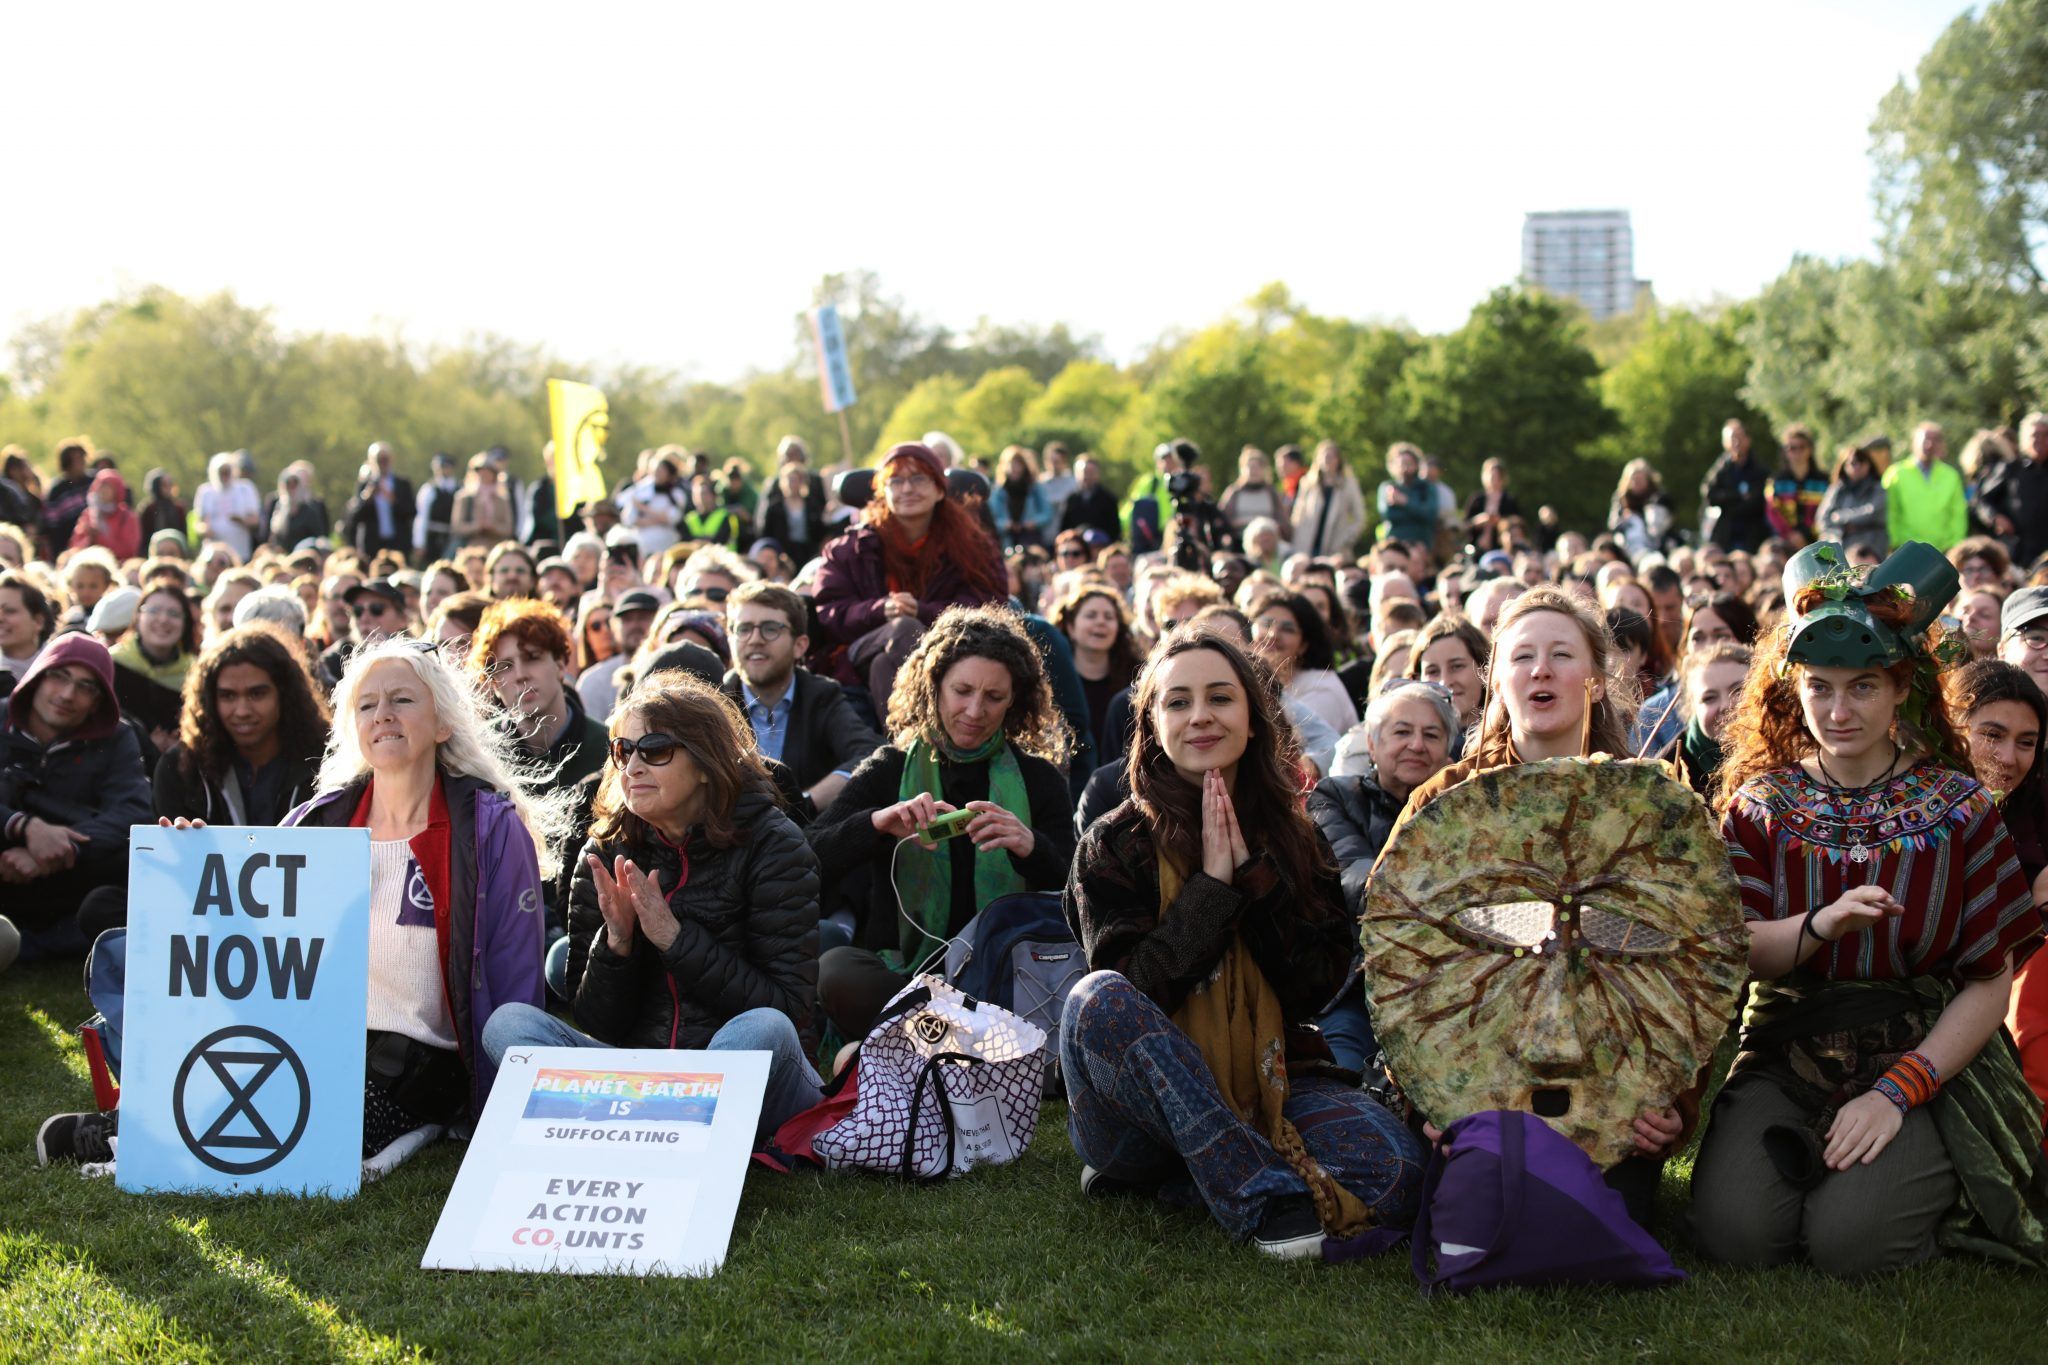 Extinction Rebellion campaigners attend a closing ceremony in Hyde Park to mark the voluntary end of the London protests on April 25, 2019 in London, England. The protest group announced that the demonstrations will come to an end after eleven days of roadblocks, sit-ins and the halting of sections of the public transport system, in a bid to highlight environmental concerns. (Photo by Dan Kitwood/Getty Images)